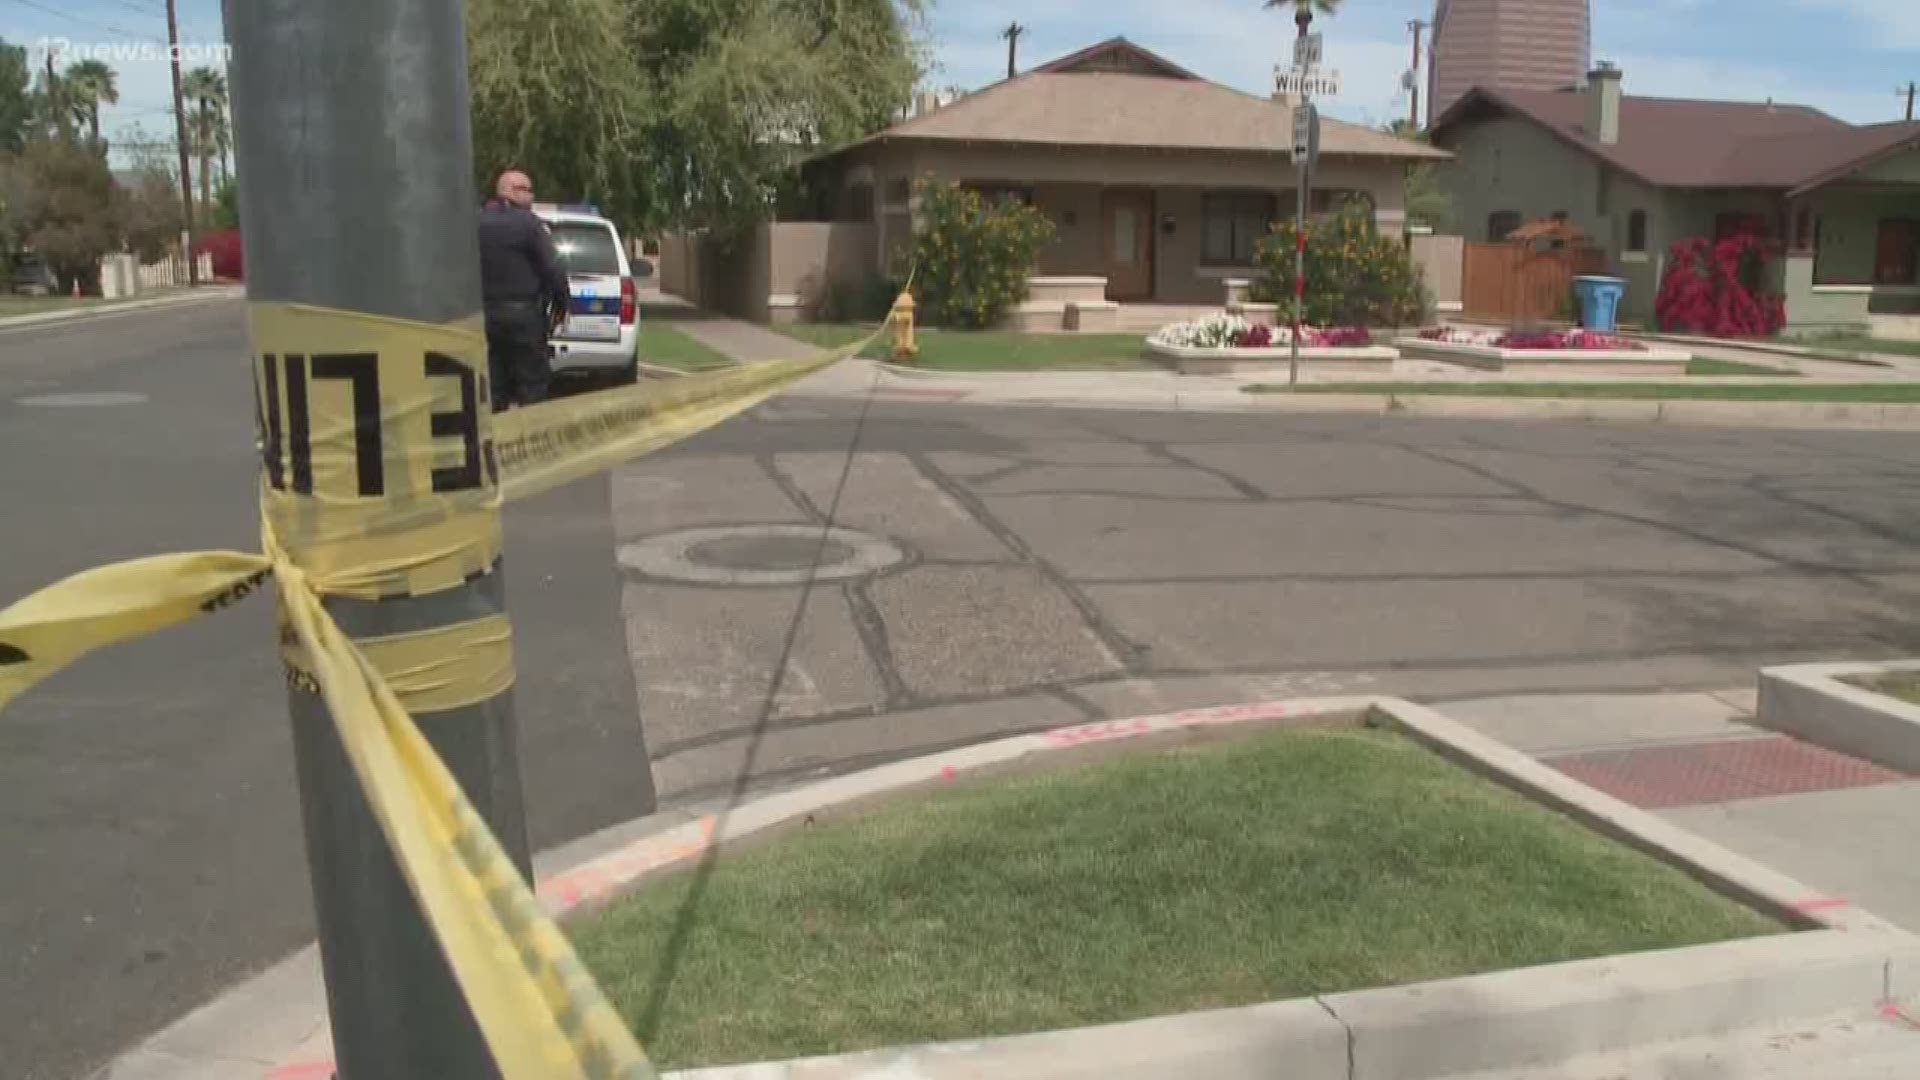 Police arrested a man Saturday morning near 7th Avenue and McDowell Road after he set fire to a woman's front door and allegedly killed a man down the street.